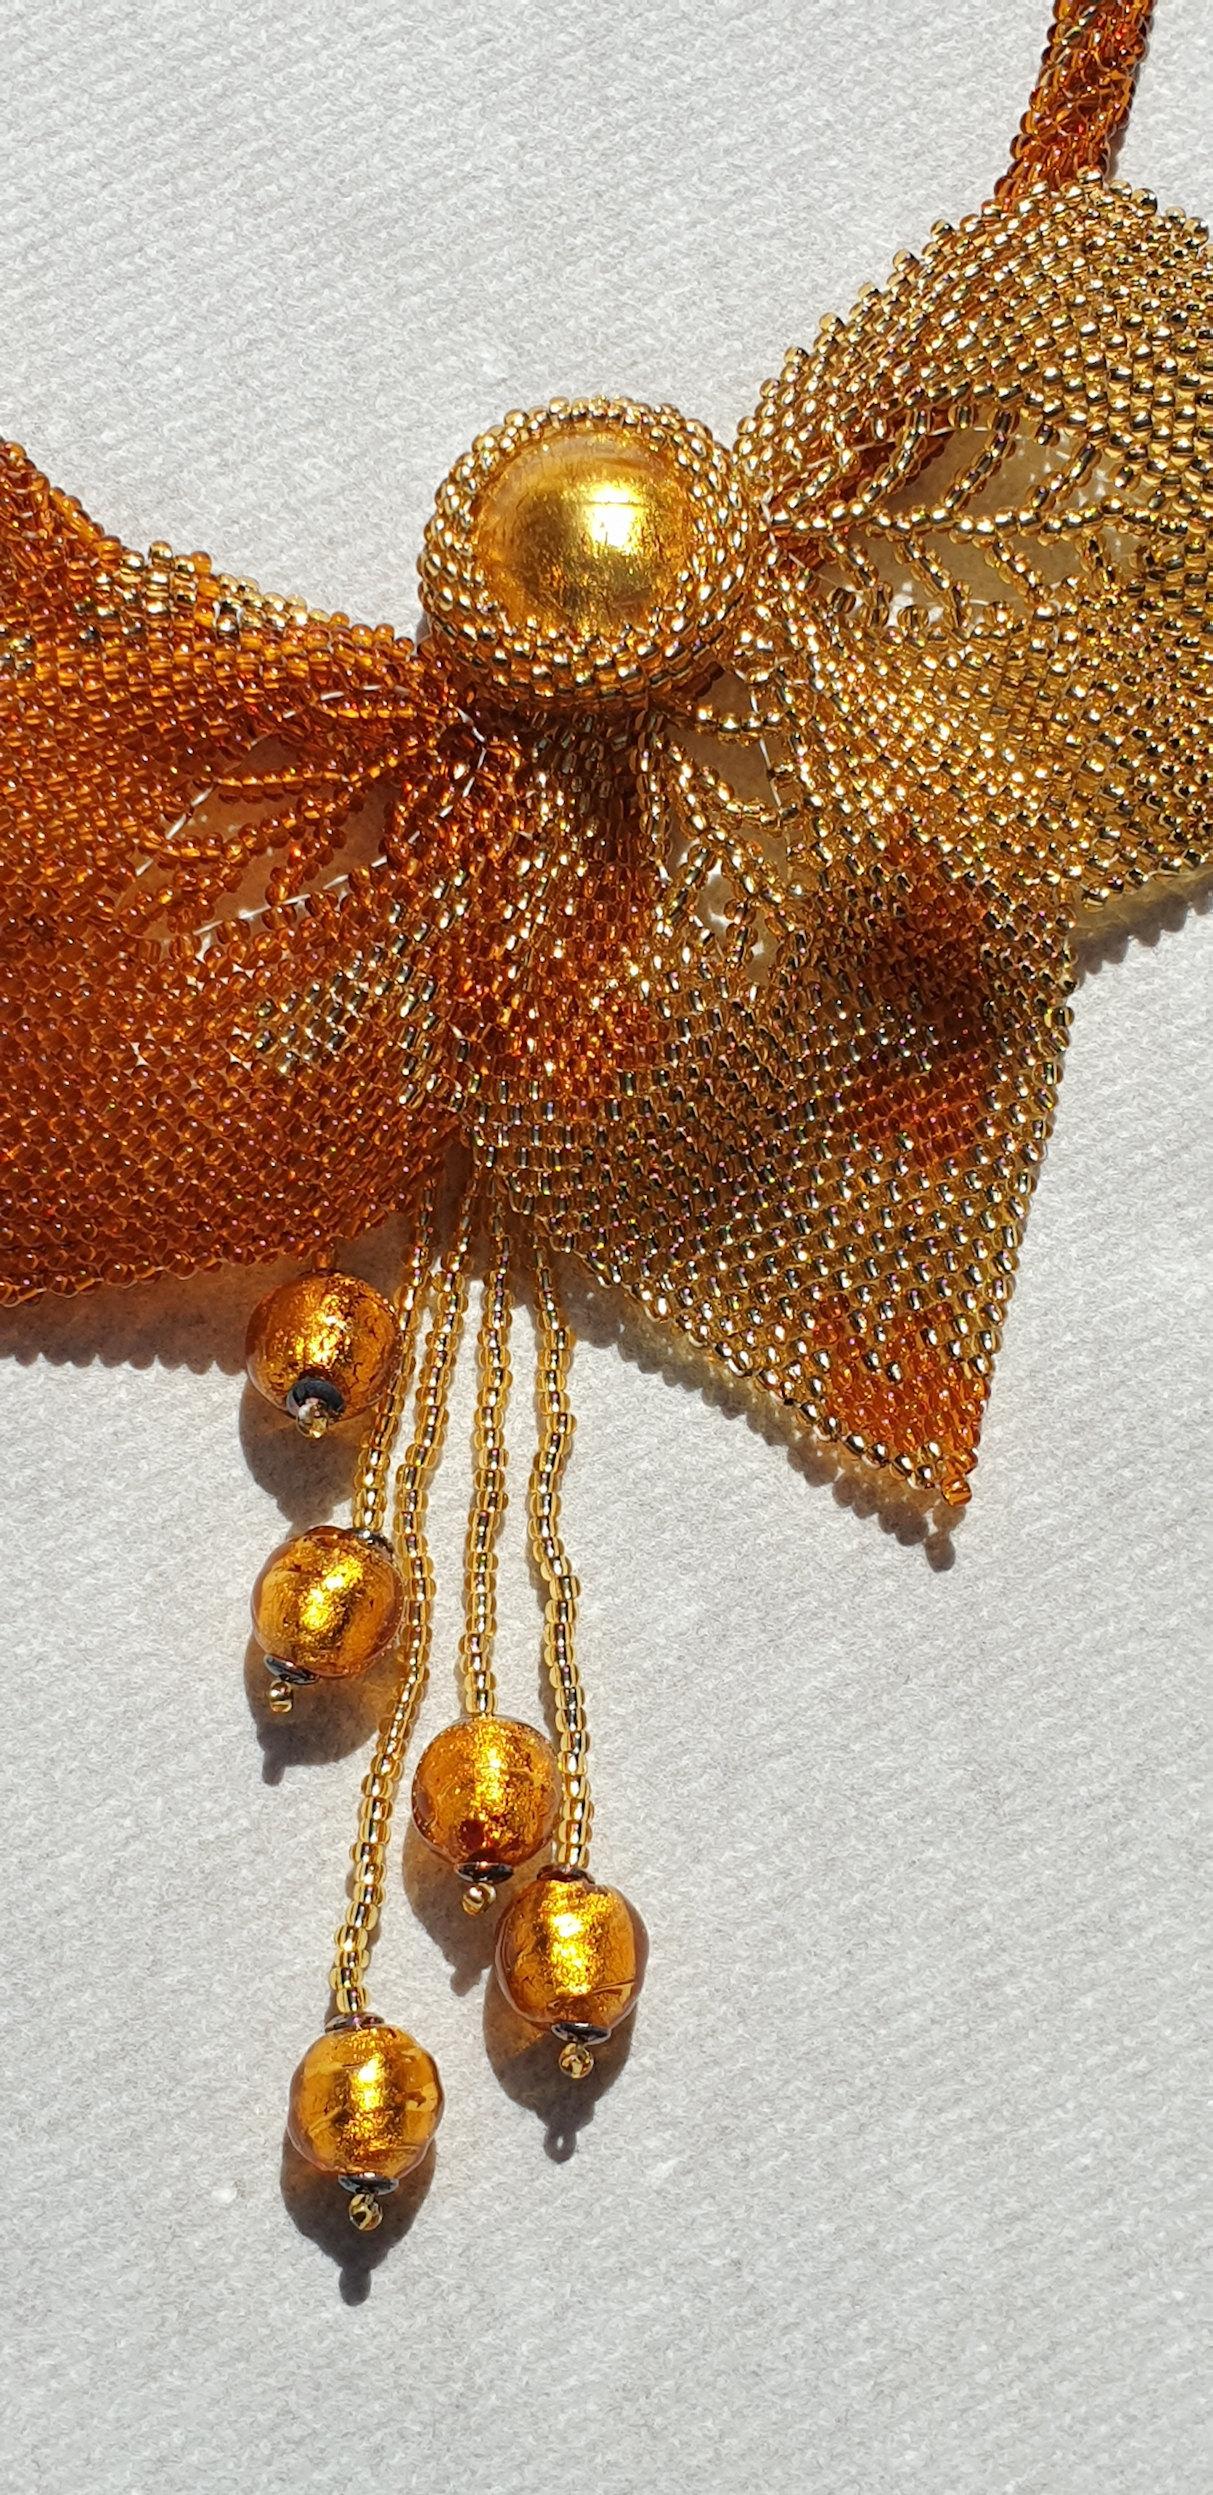 Women's Amber and gold Murano glass beads fashion necklace by Venetian artist Paola B.